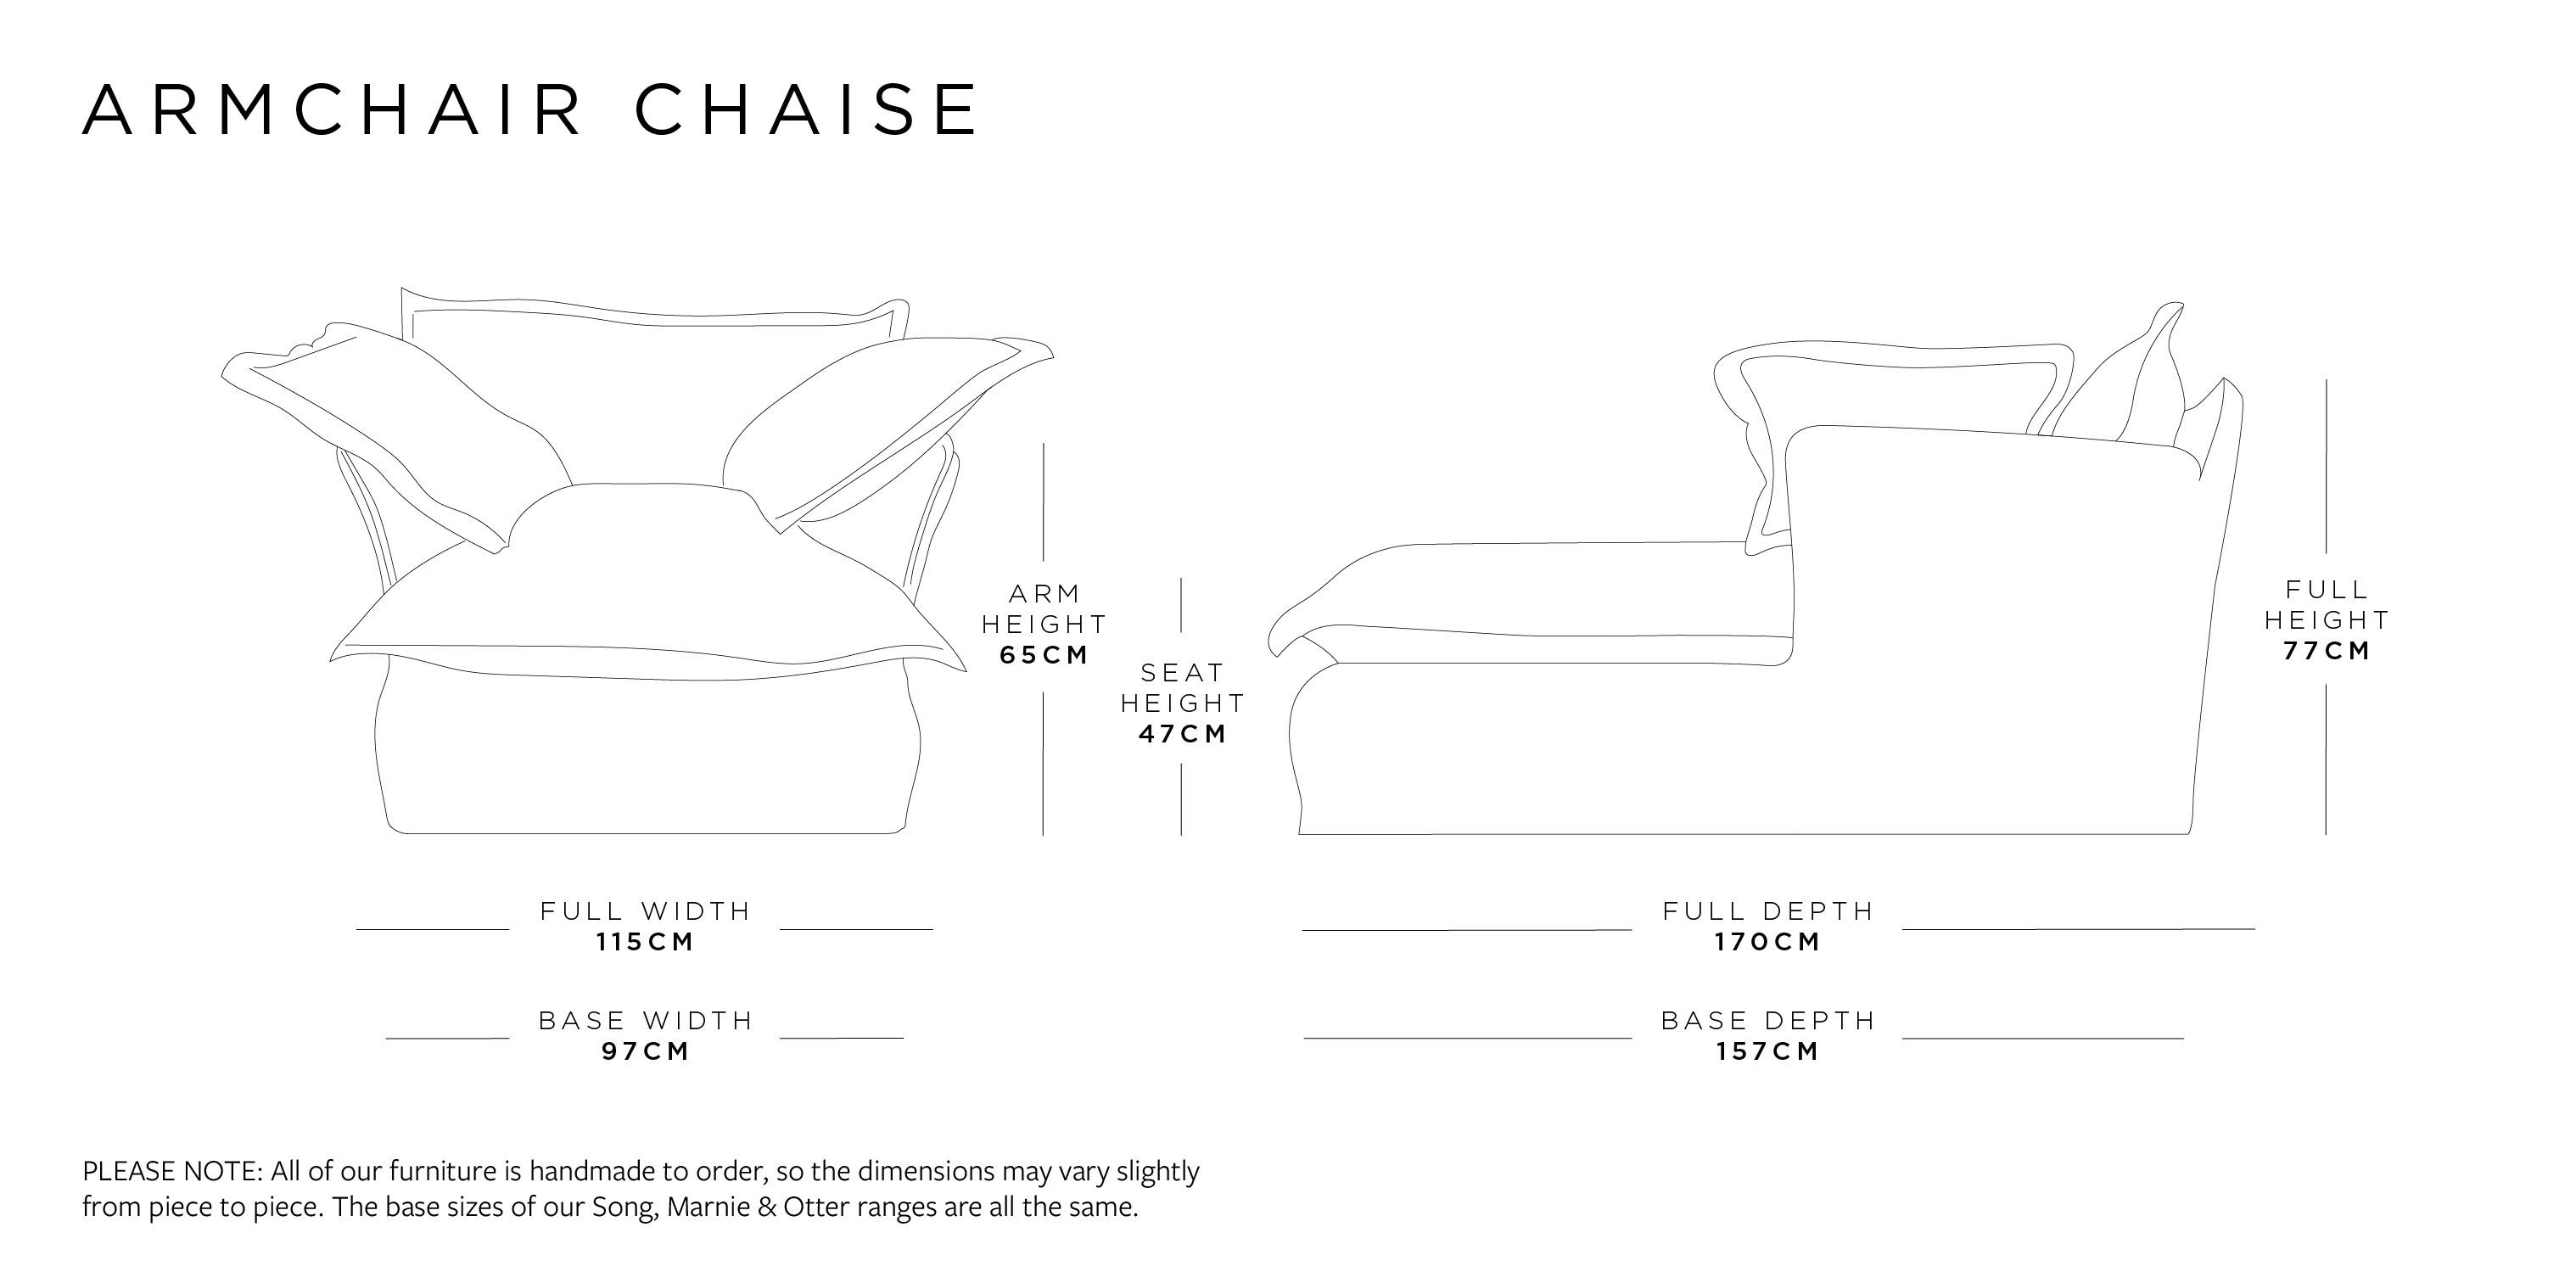 Armchair Chaise | Otter Range Size Guide